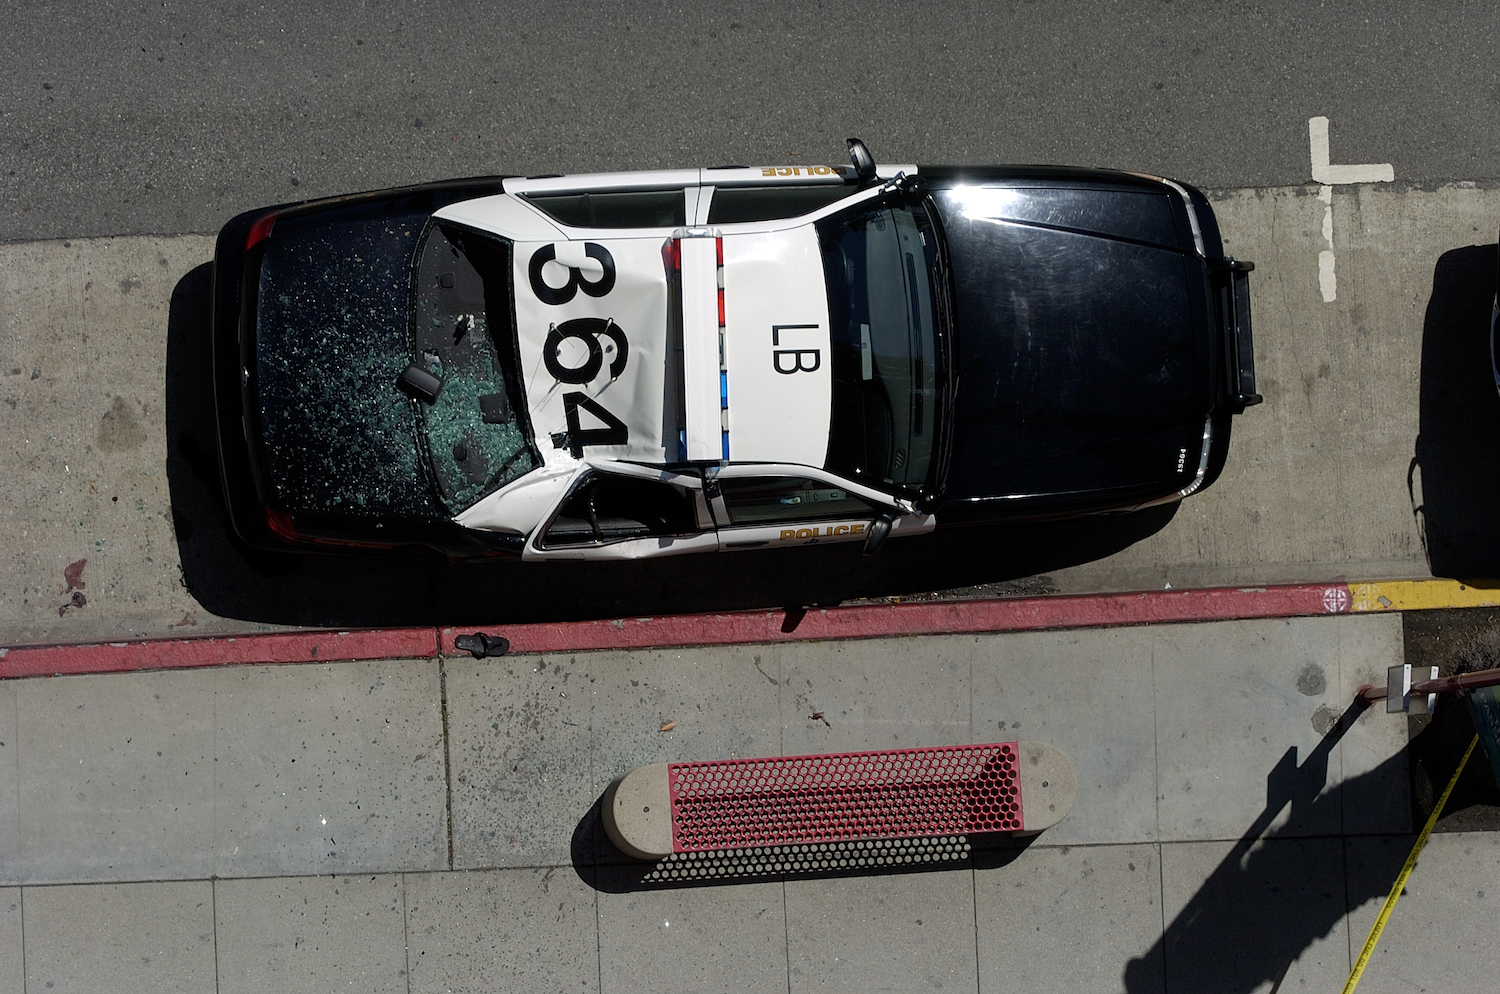 Bird's eye view of a black and white police car in Los Angeles, the numbers on its roof clearly visible.